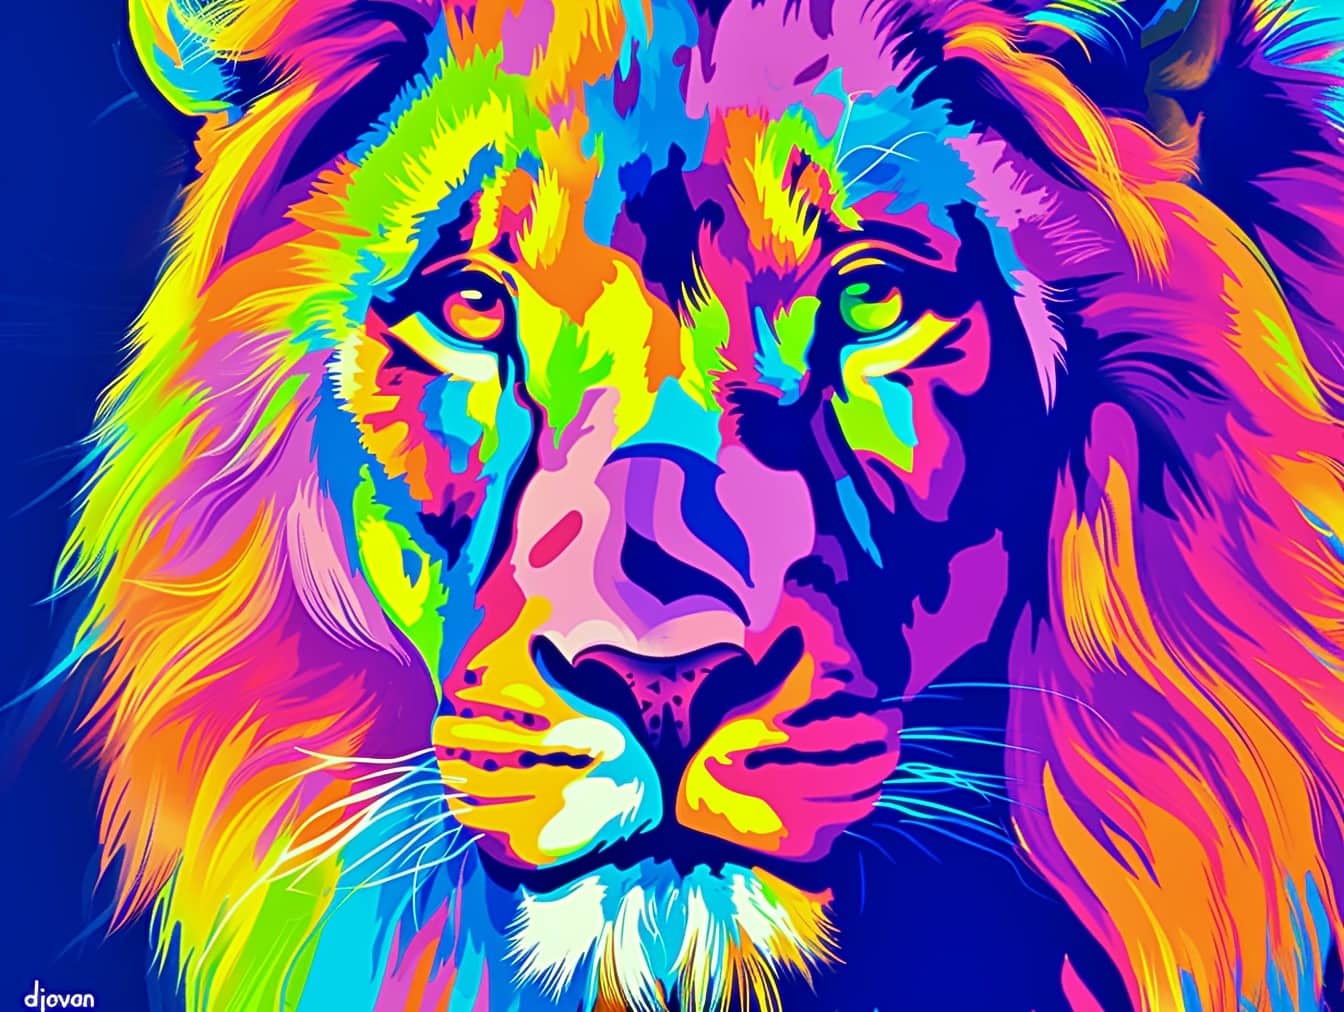 Pop art style graphic of lion head with long colorful mane